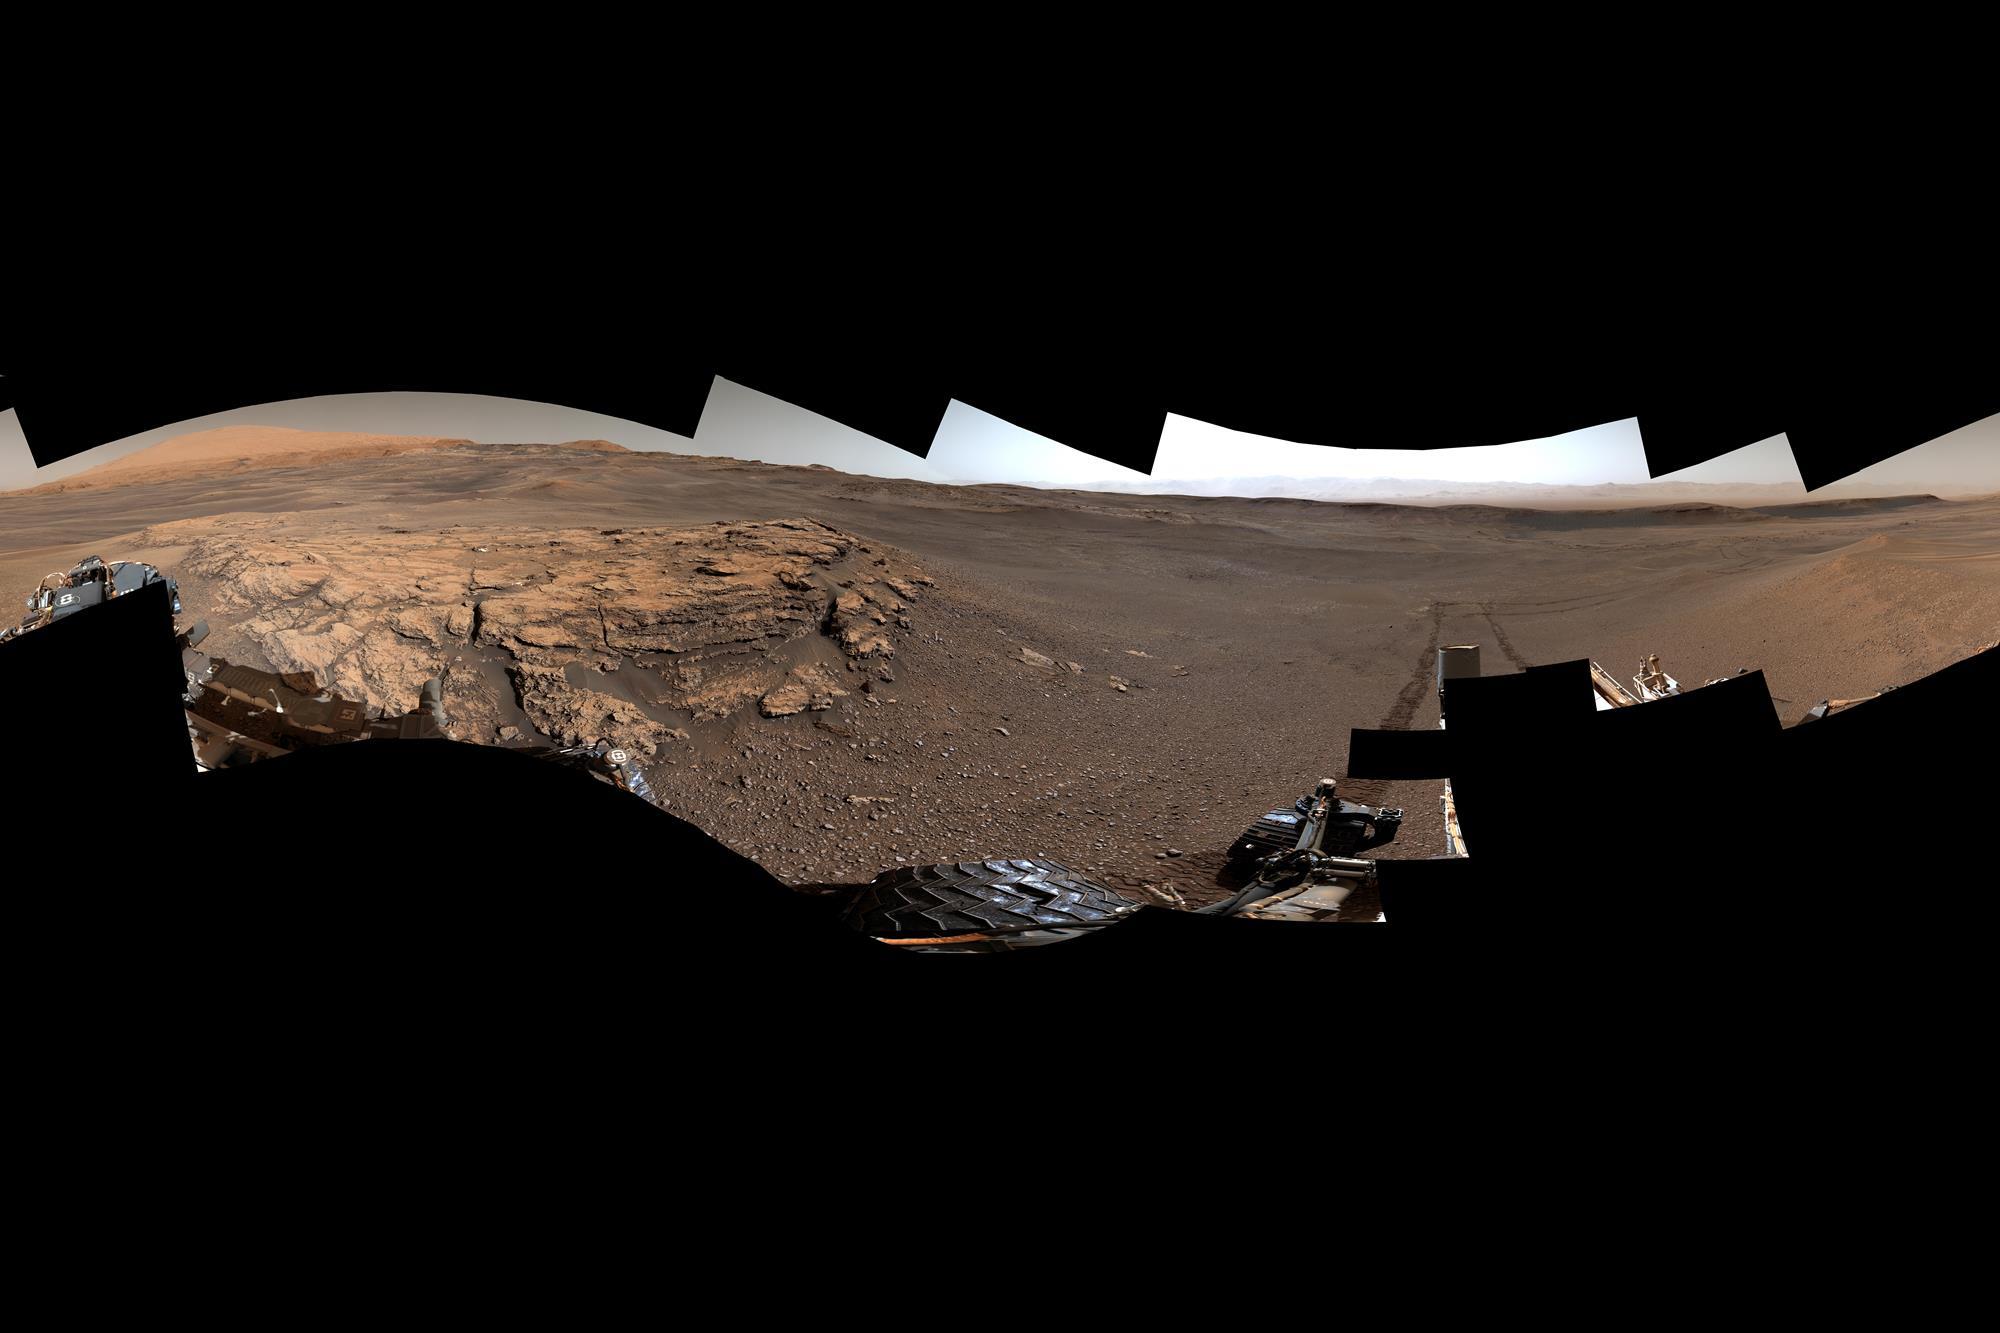 I SHOULD BE DESERVING TO BE TO MARS: May 2011